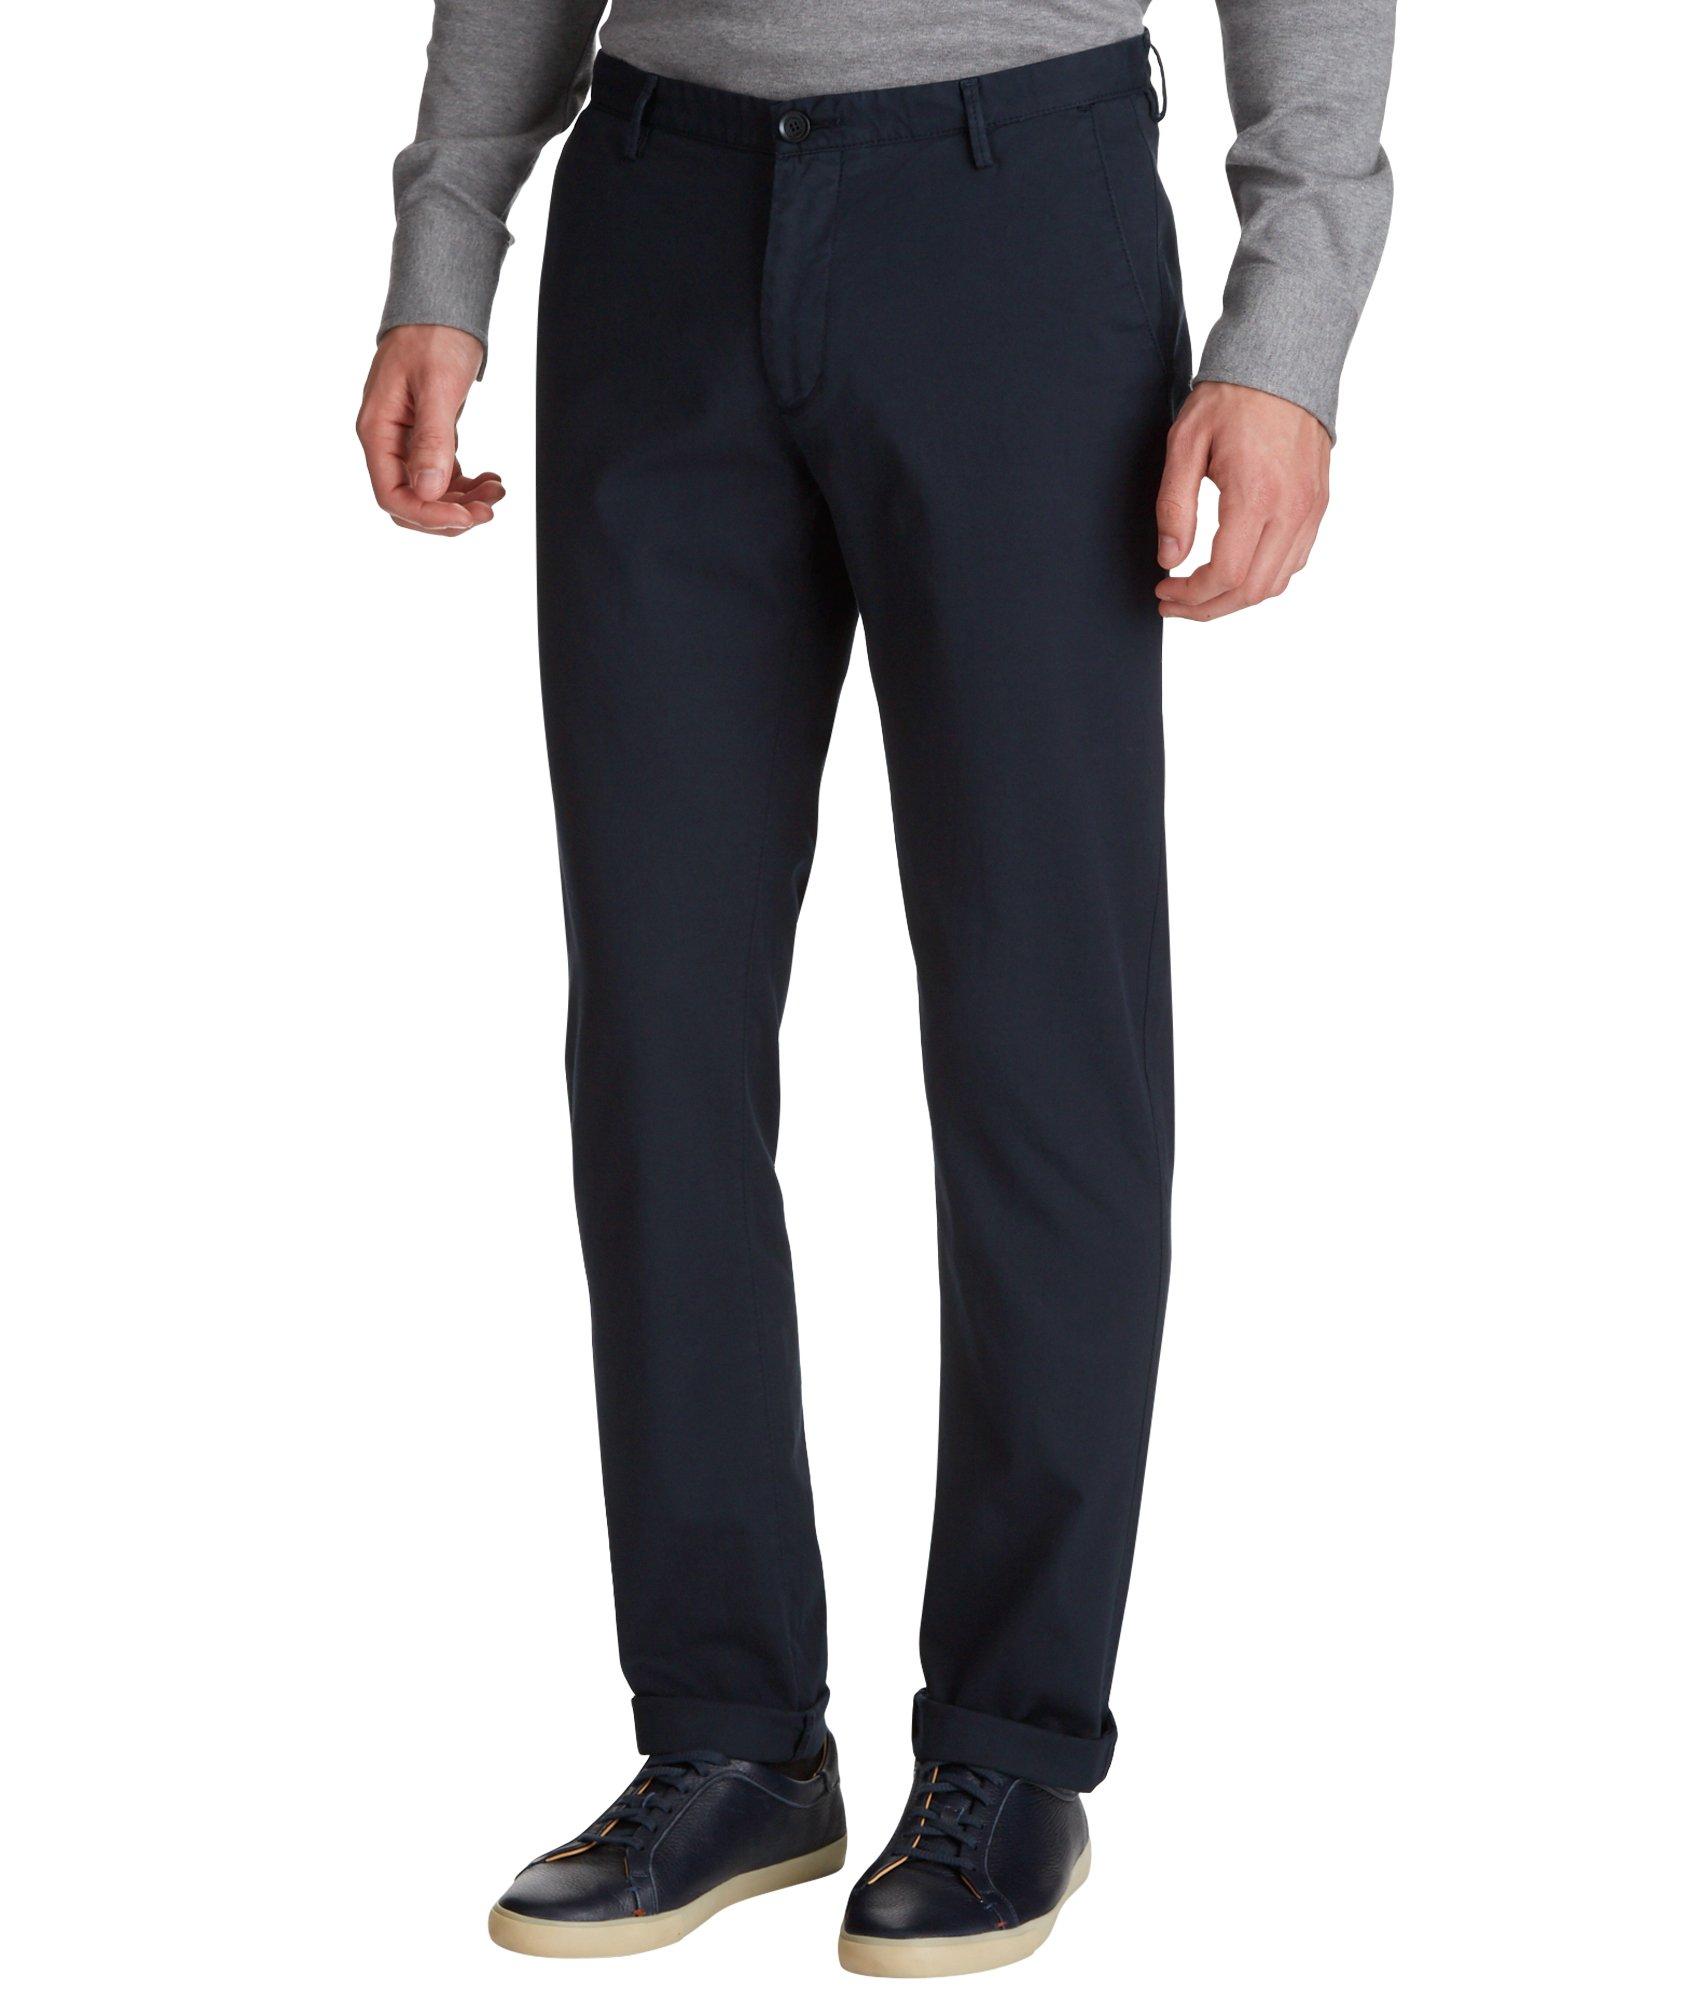 Rice Slim Fit Trousers image 0